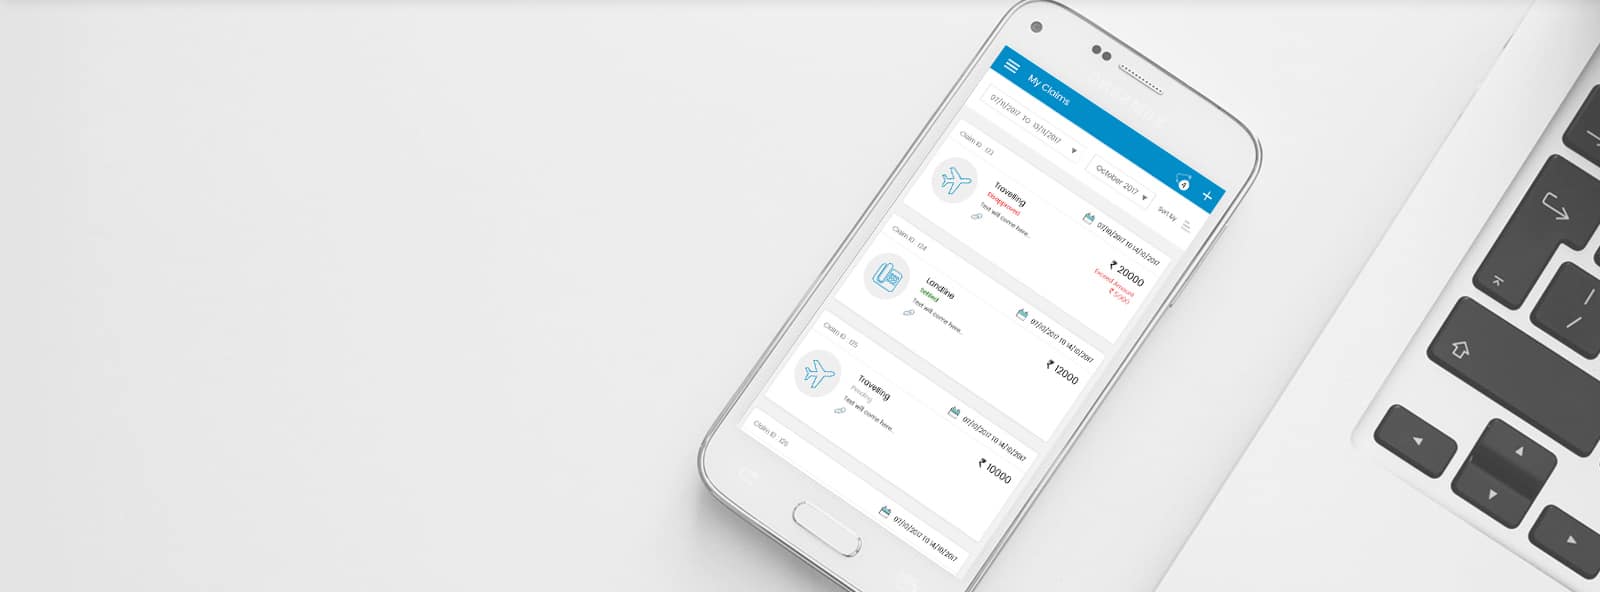 Zento is an Employee Expense Management Solution - Zento